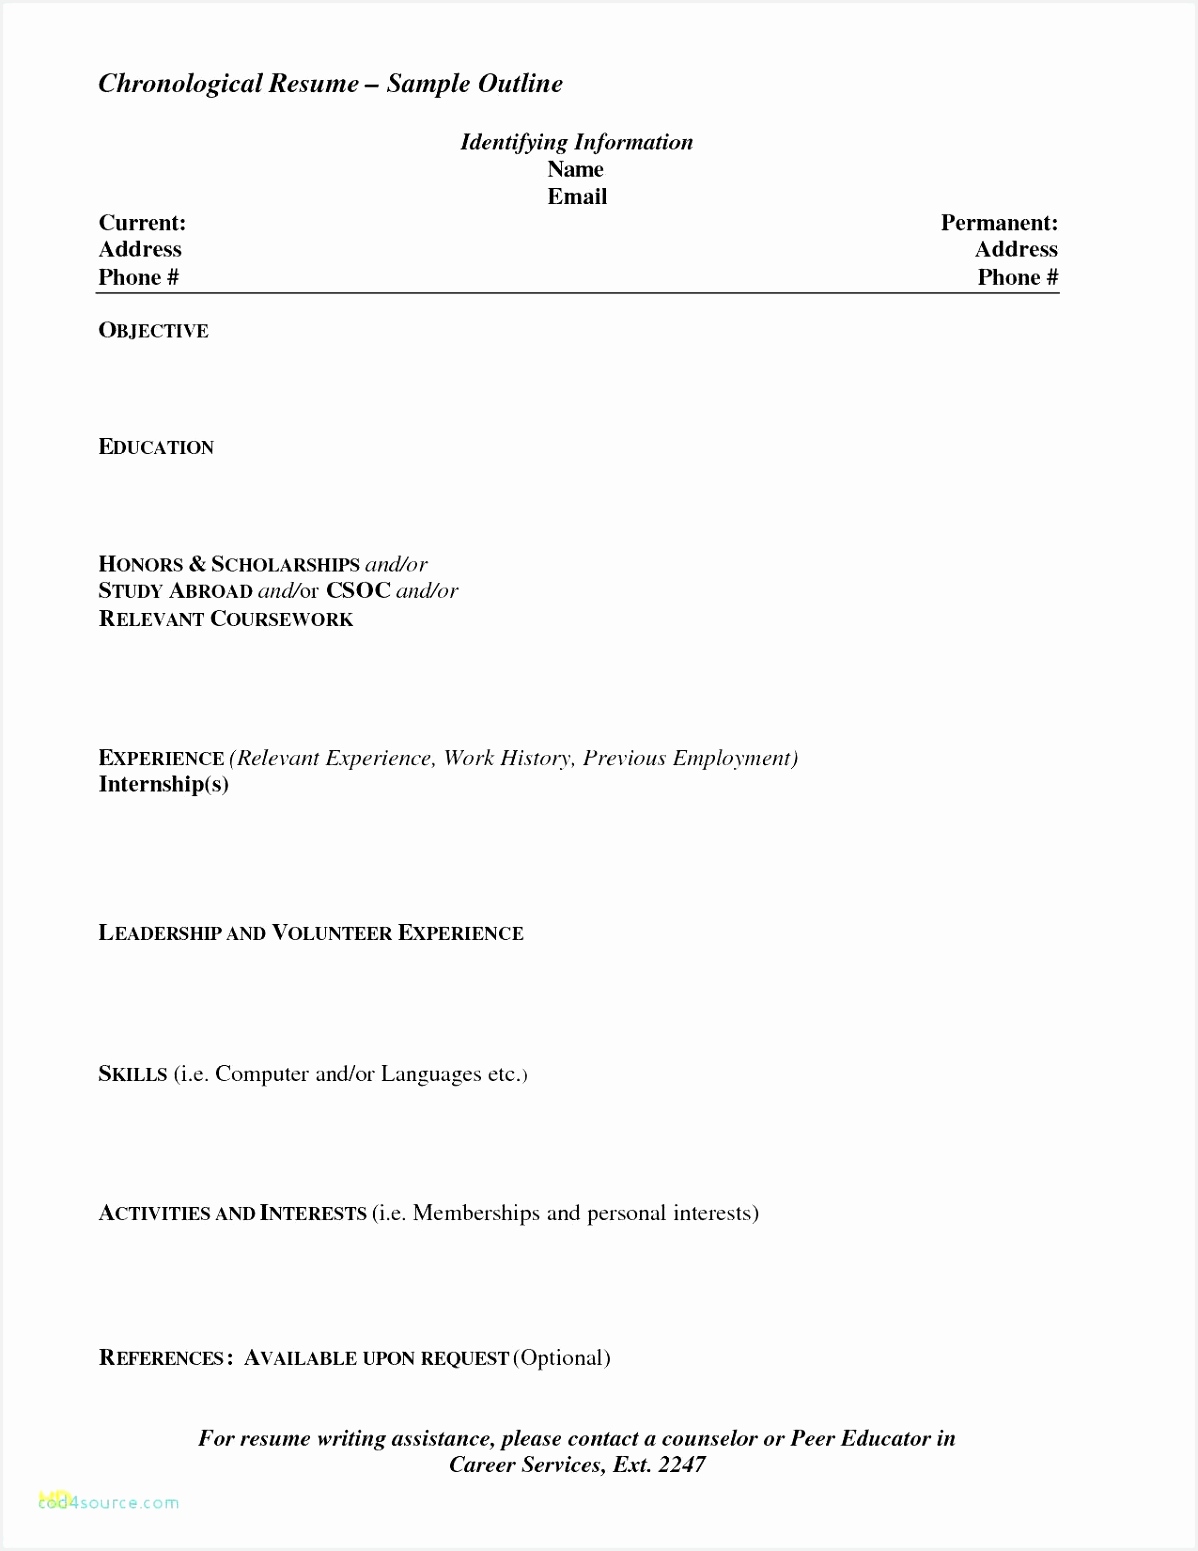 26 s of "Word Document Invoice Template and Free Microsoft Resume Templates Elegant Java 0d Archives Word" 155111983bcuw